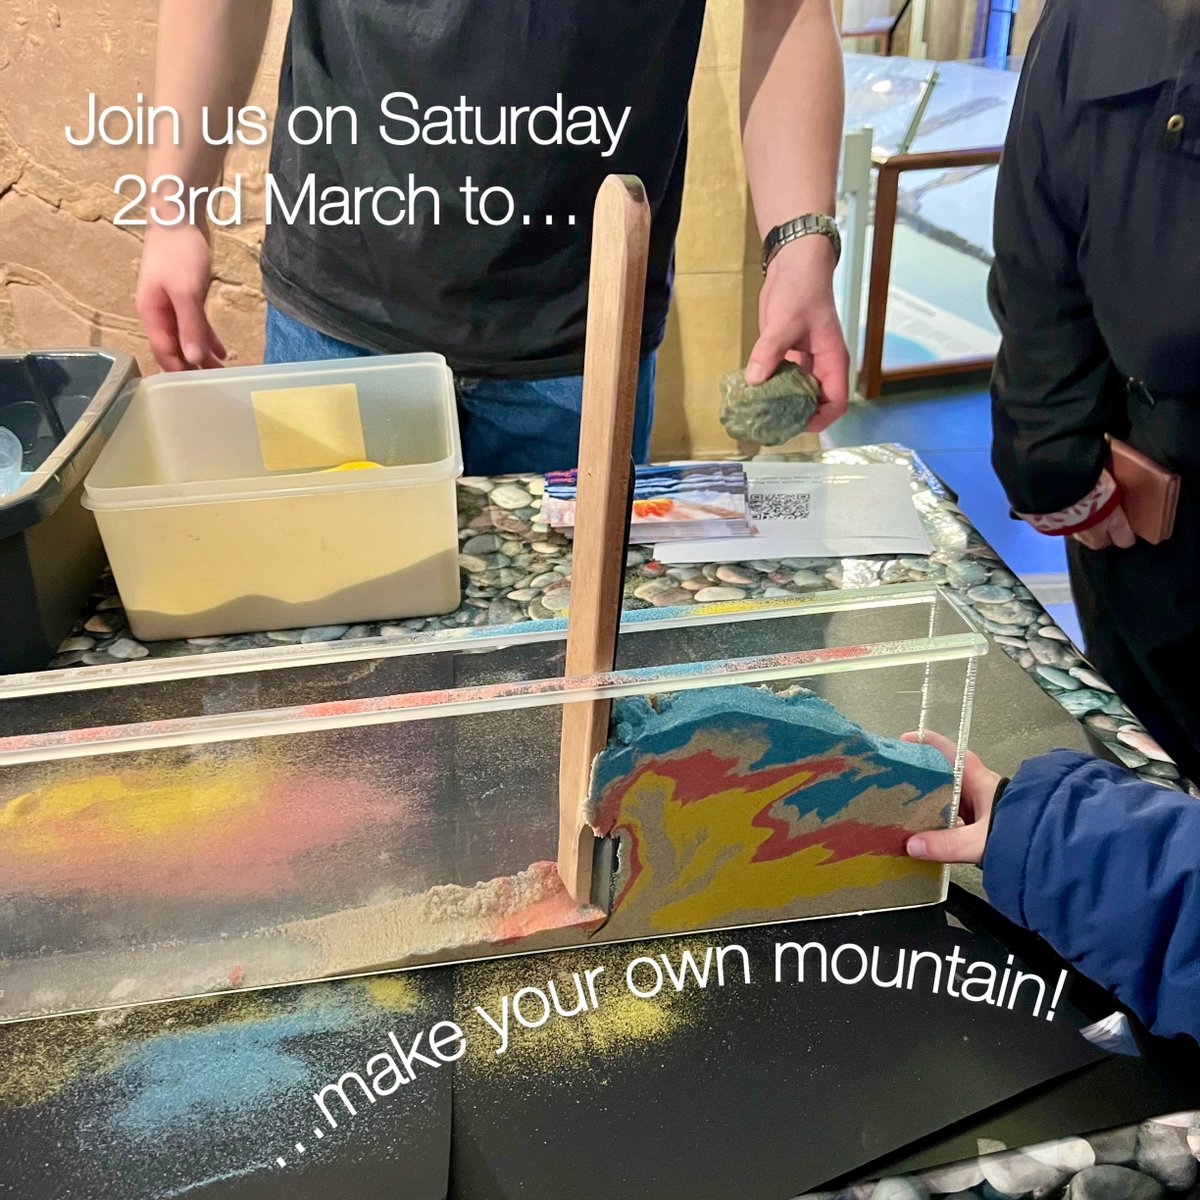 Don’t forget to join us on Saturday 23rd March between 11am and 3pm! Meet the team and the scientists of @EarthSciCam and take part in exciting activities, including making mountains, at our Earth Sciences Fair. 🏔️ #CambridgeMuseums #MuseumActivities #EarthSciences